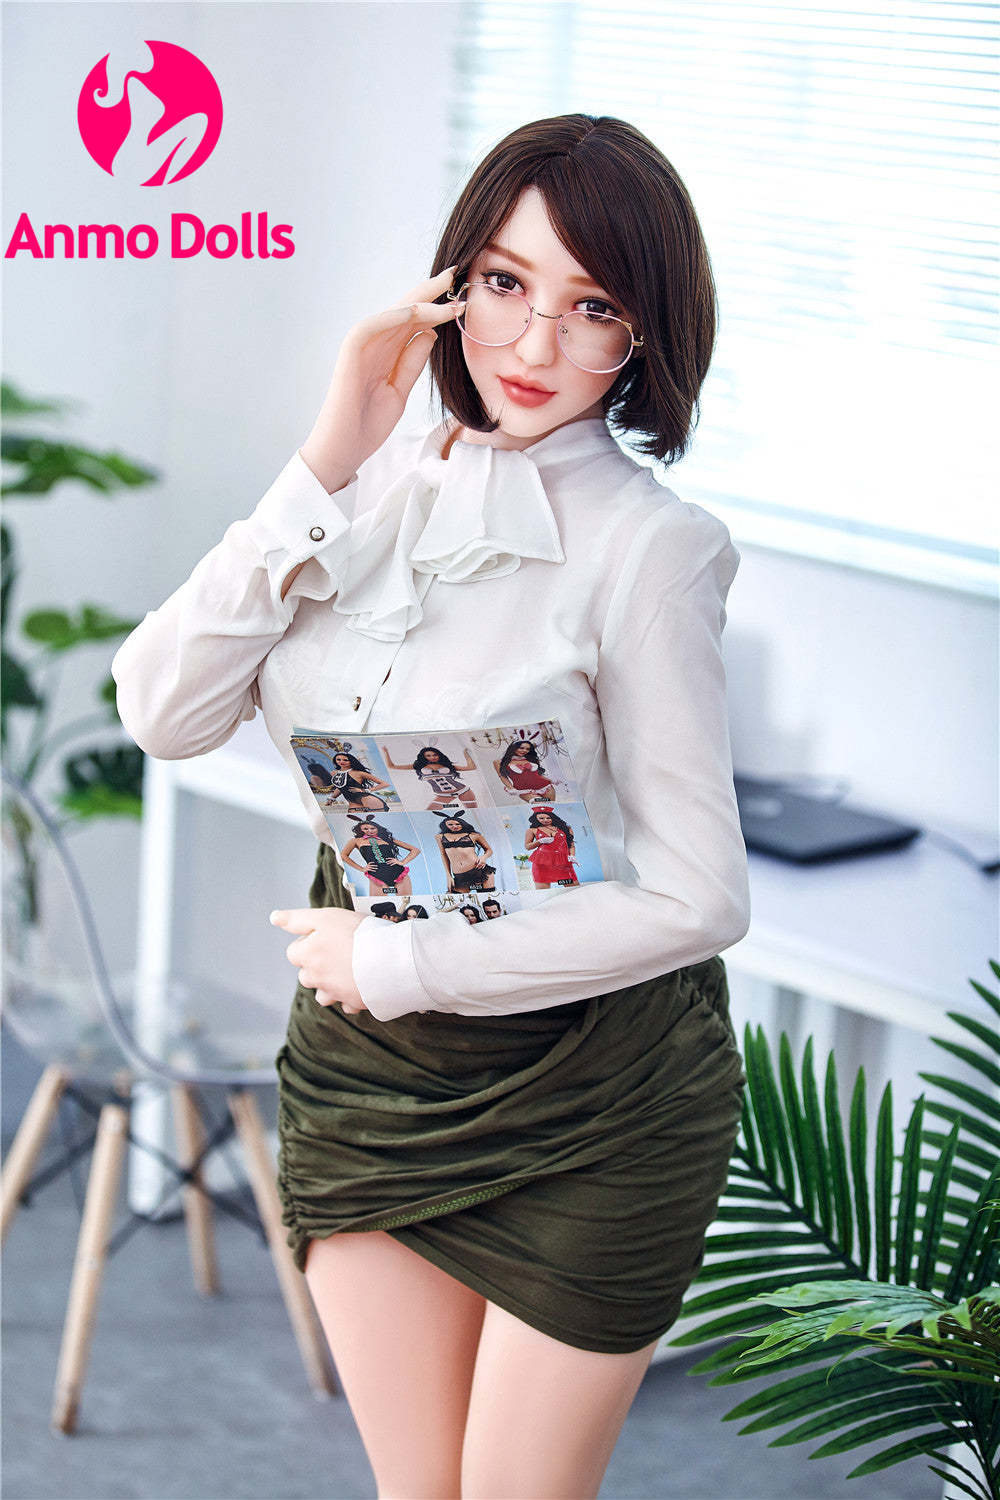 Marianne - Gorgeous Asian Sex Doll in Office by Anmodolls